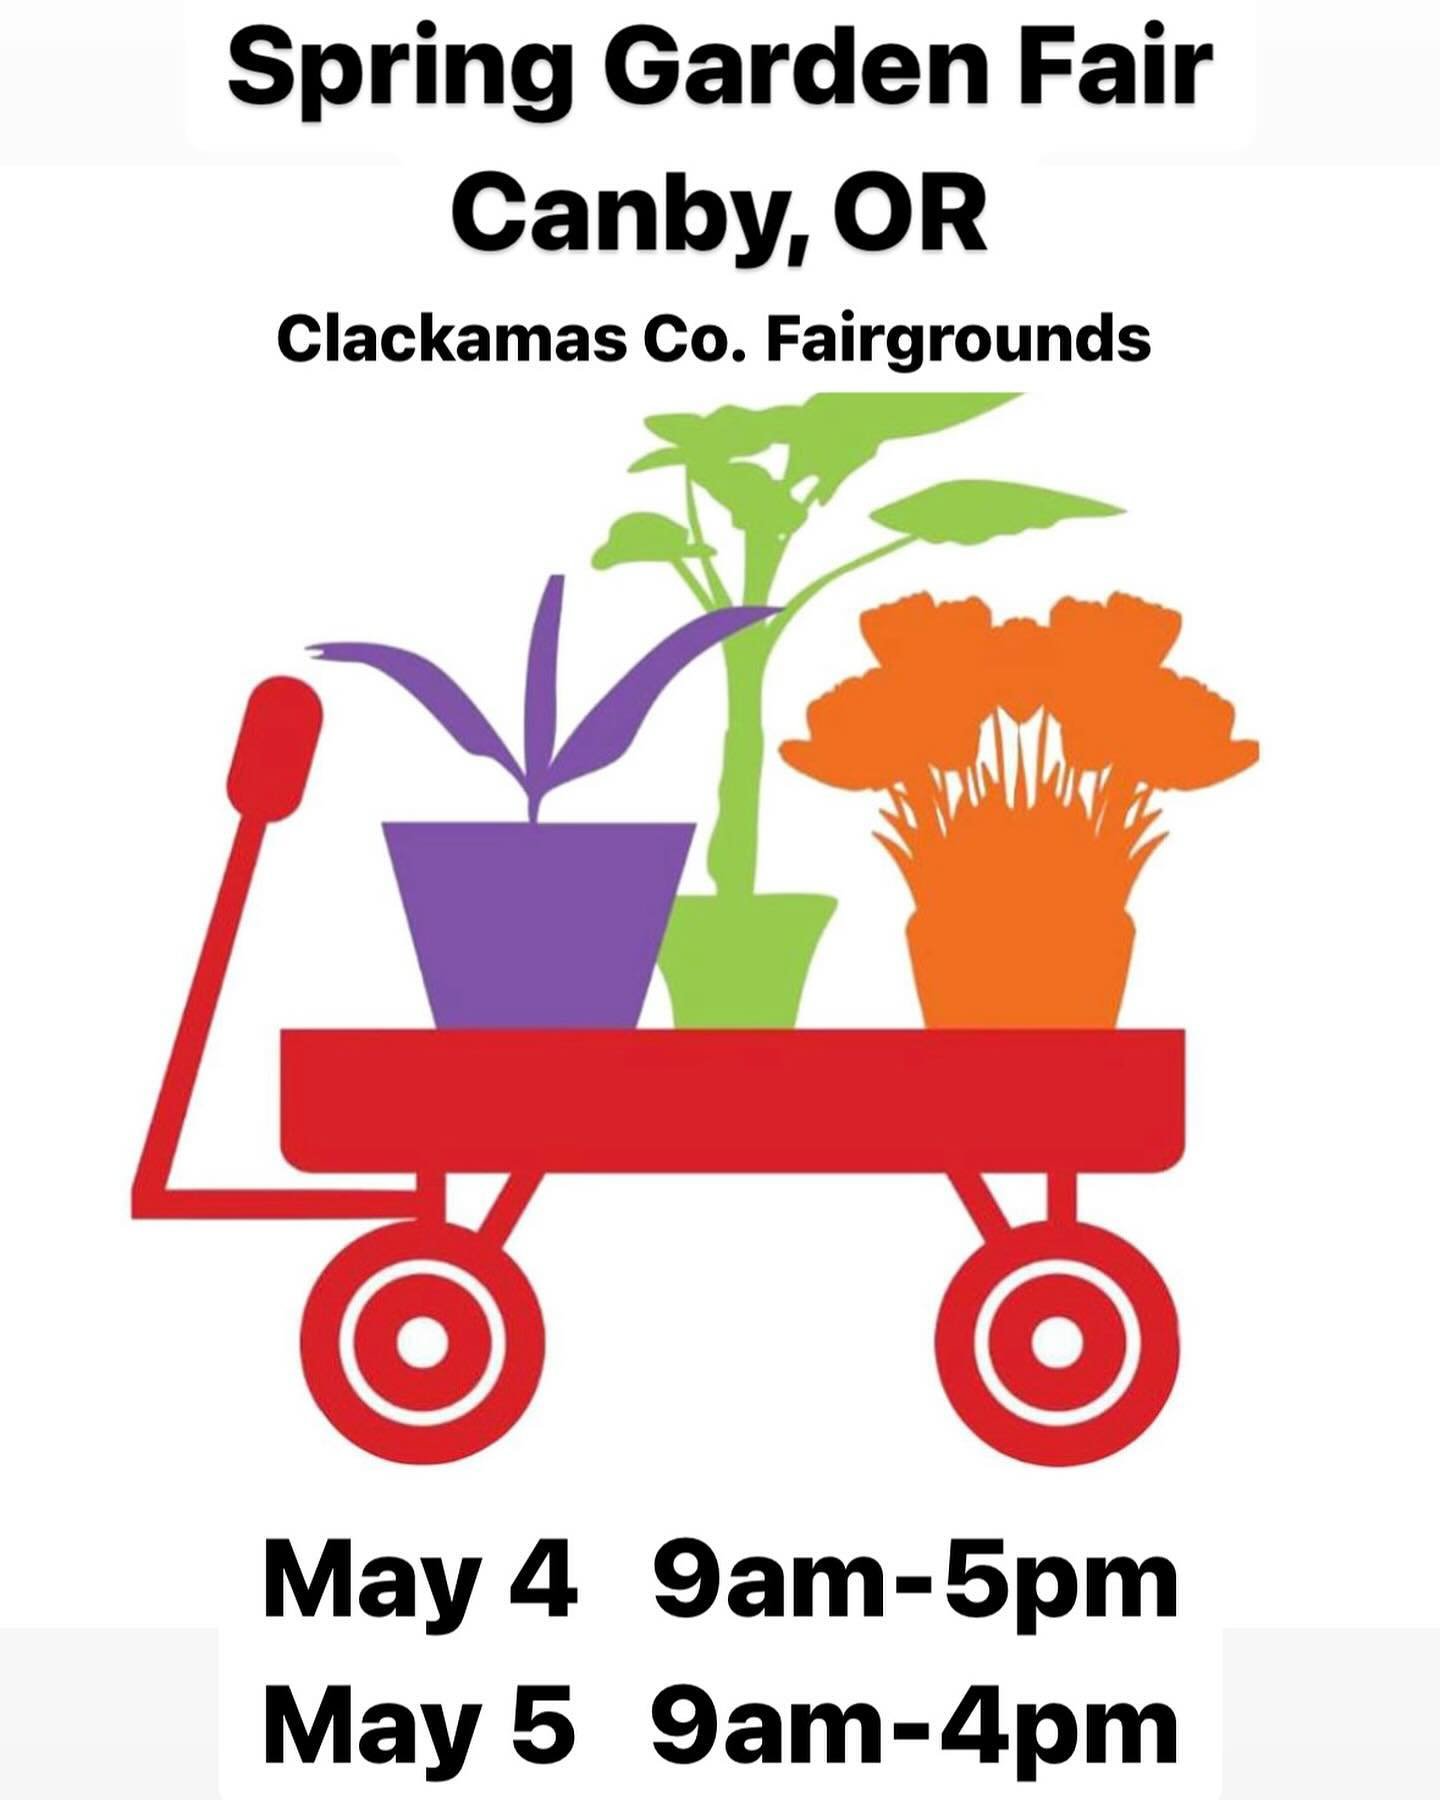 Come visit Echo Valley Natives at the Spring Garden Fair presented by the Oregon Master Gardeners in Canby!

Sat May 4 9am-5pm
Sun May 5 9am-4pm
Clackamas County Fairgrounds
$7 admission (Under 16 Free!) 
Free parking
Springgardenfair.org

We have be